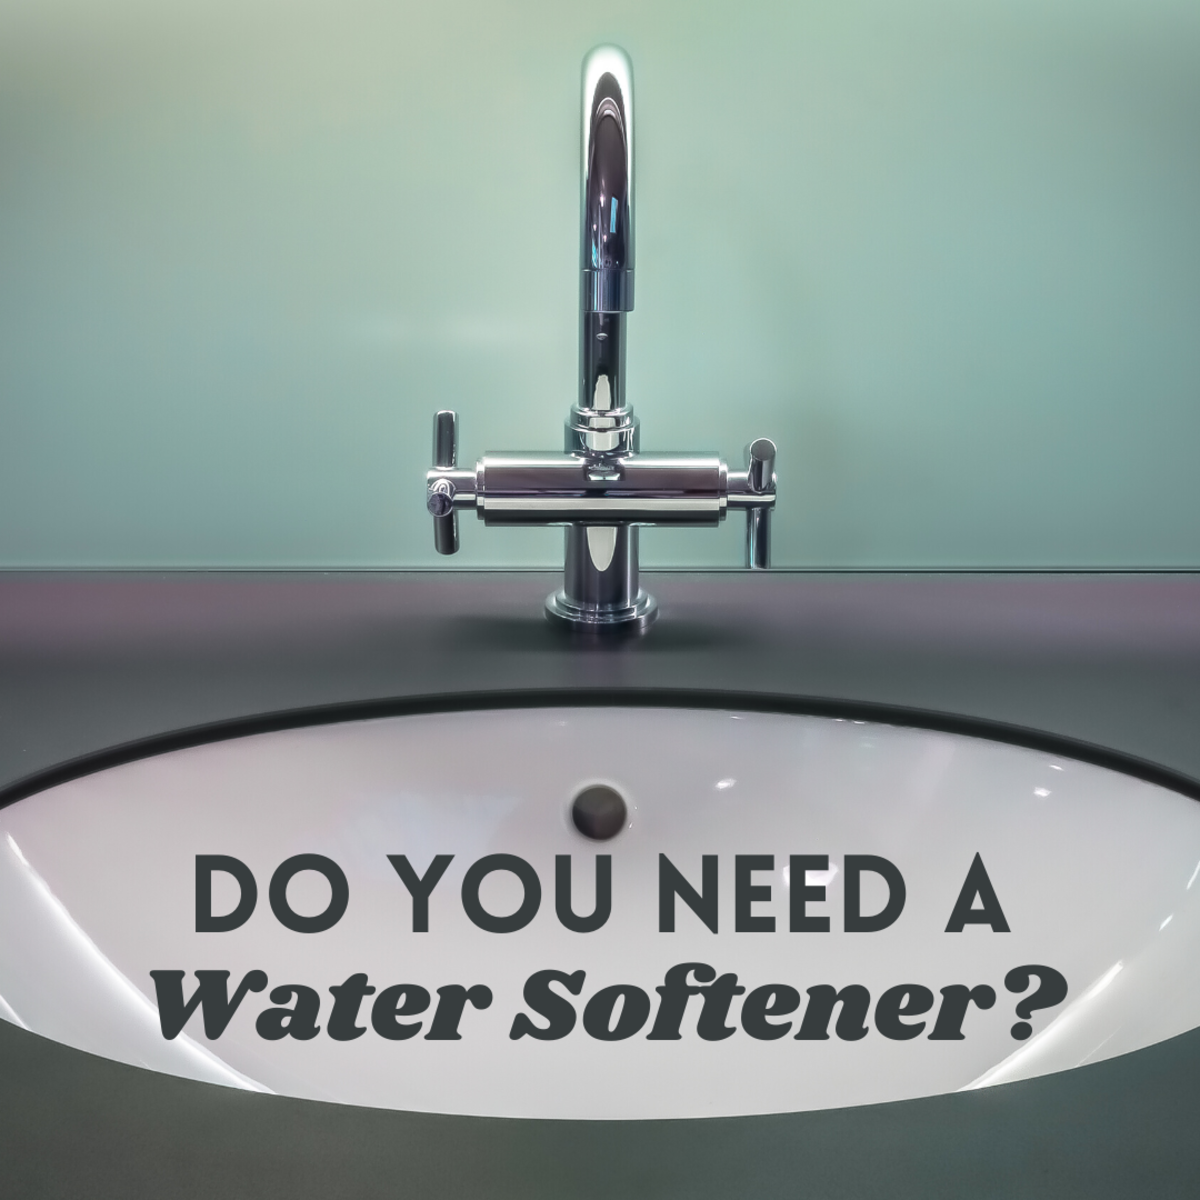 If you drink city water, do you need a water softener?